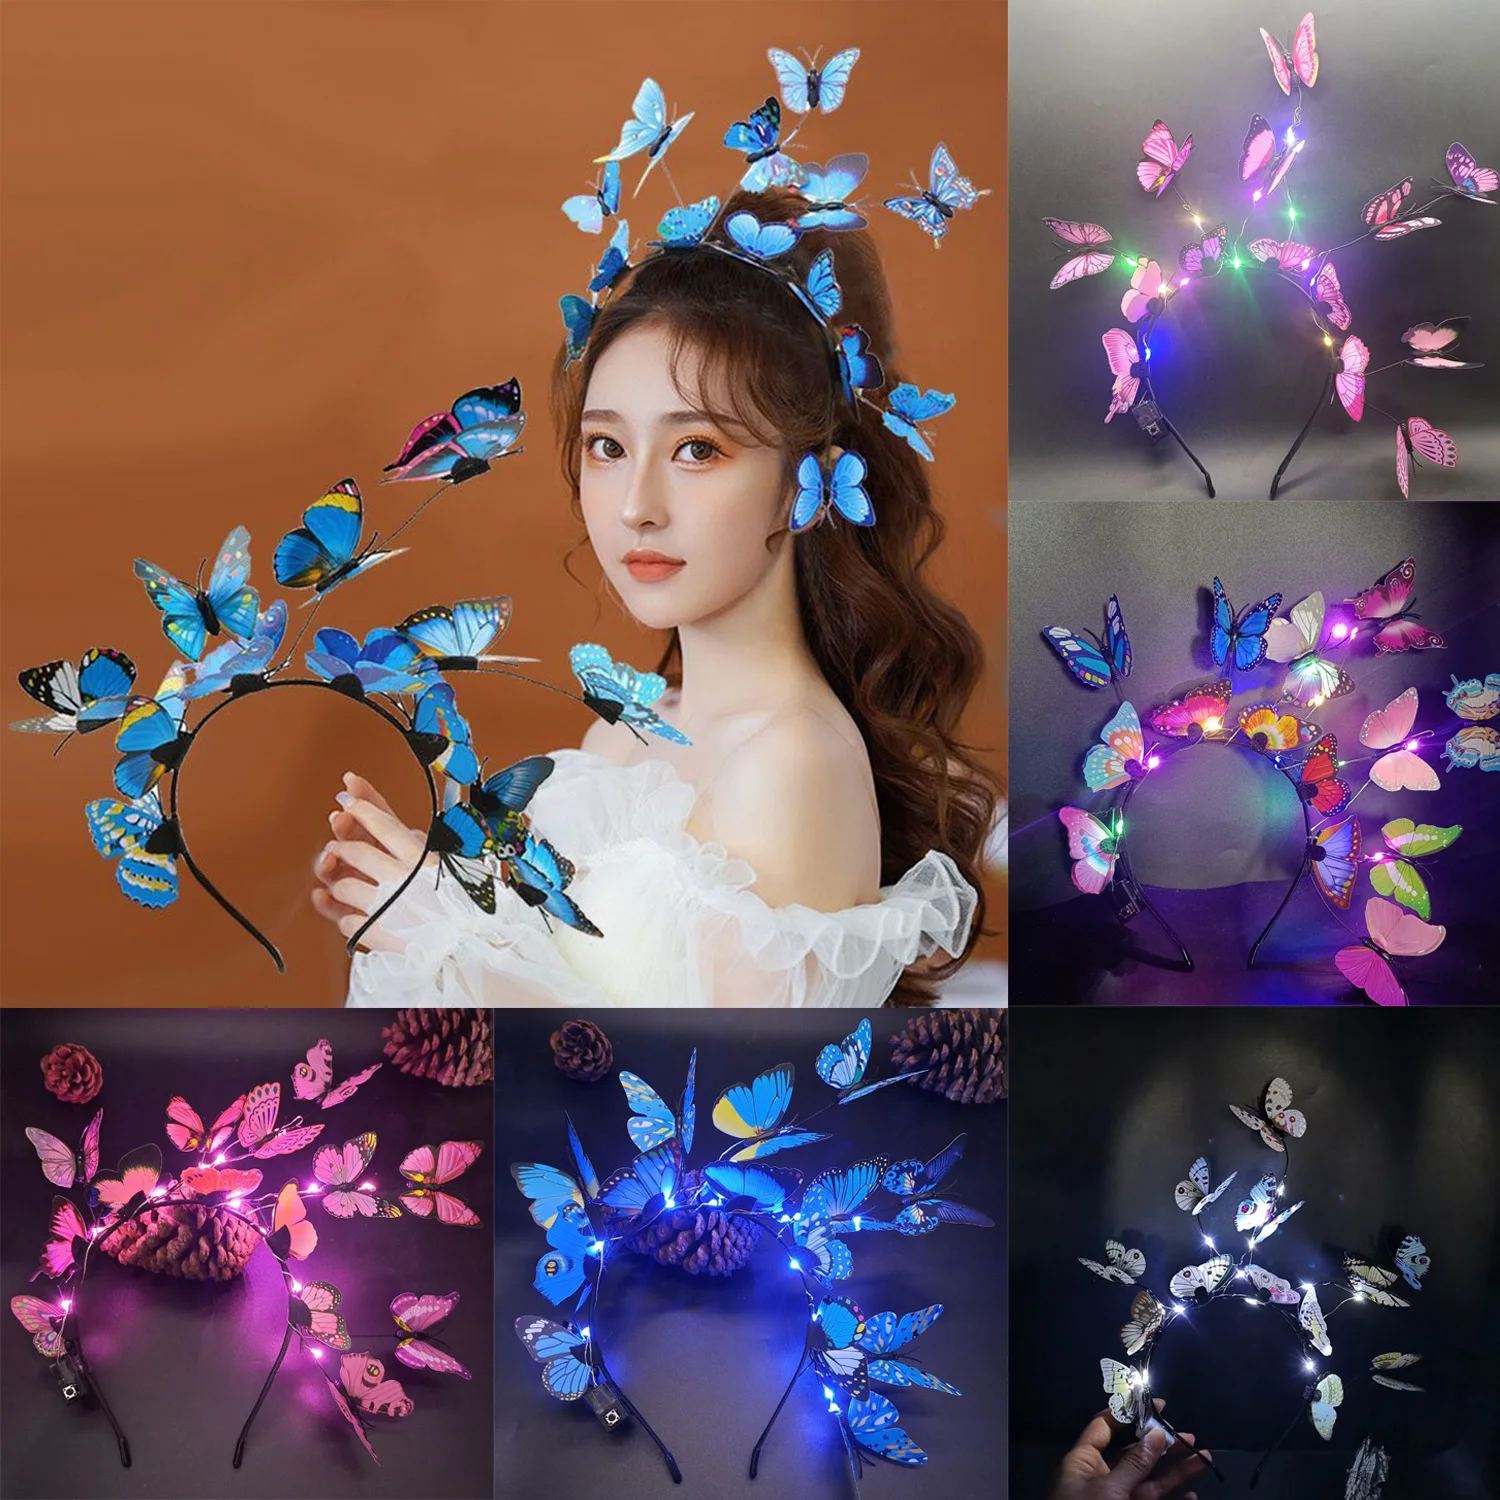 Glowing LED Light Up Butterfly Fascinator Headband Bohemian Hair Band Hoops Colorful Headpiece For Party Wedding Christmas